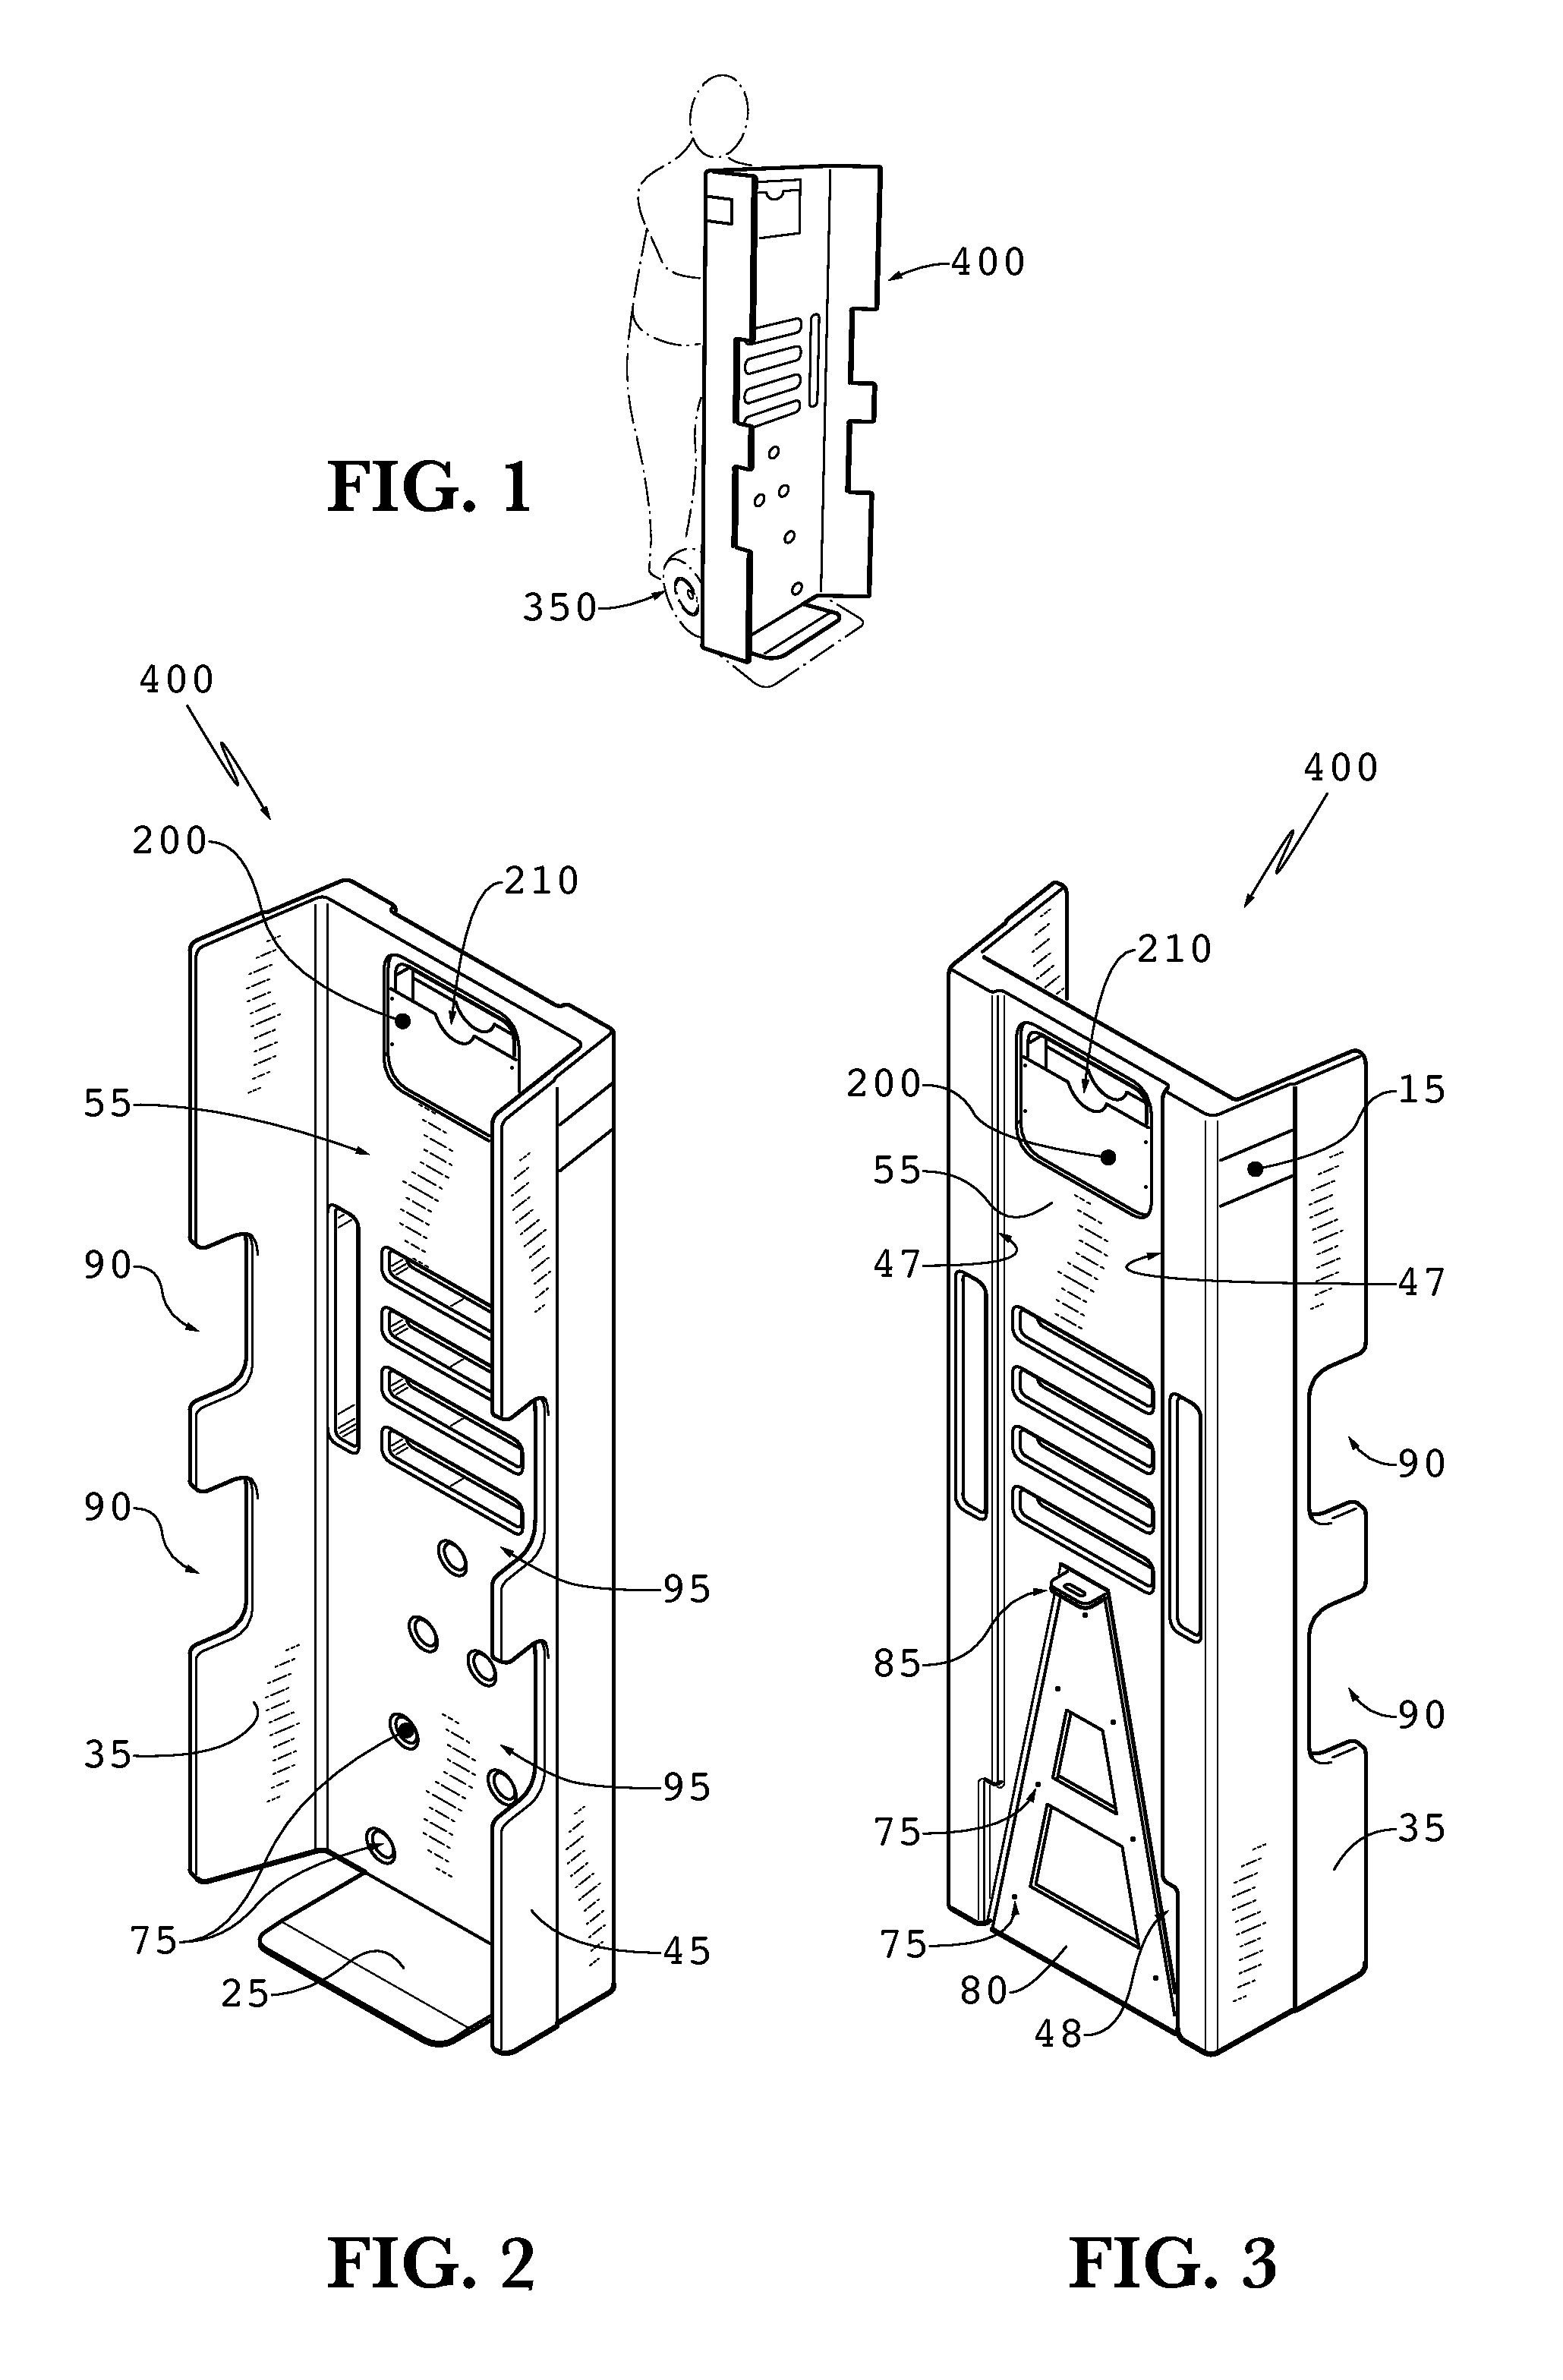 Apparatus and method for efficiently transporting various articles